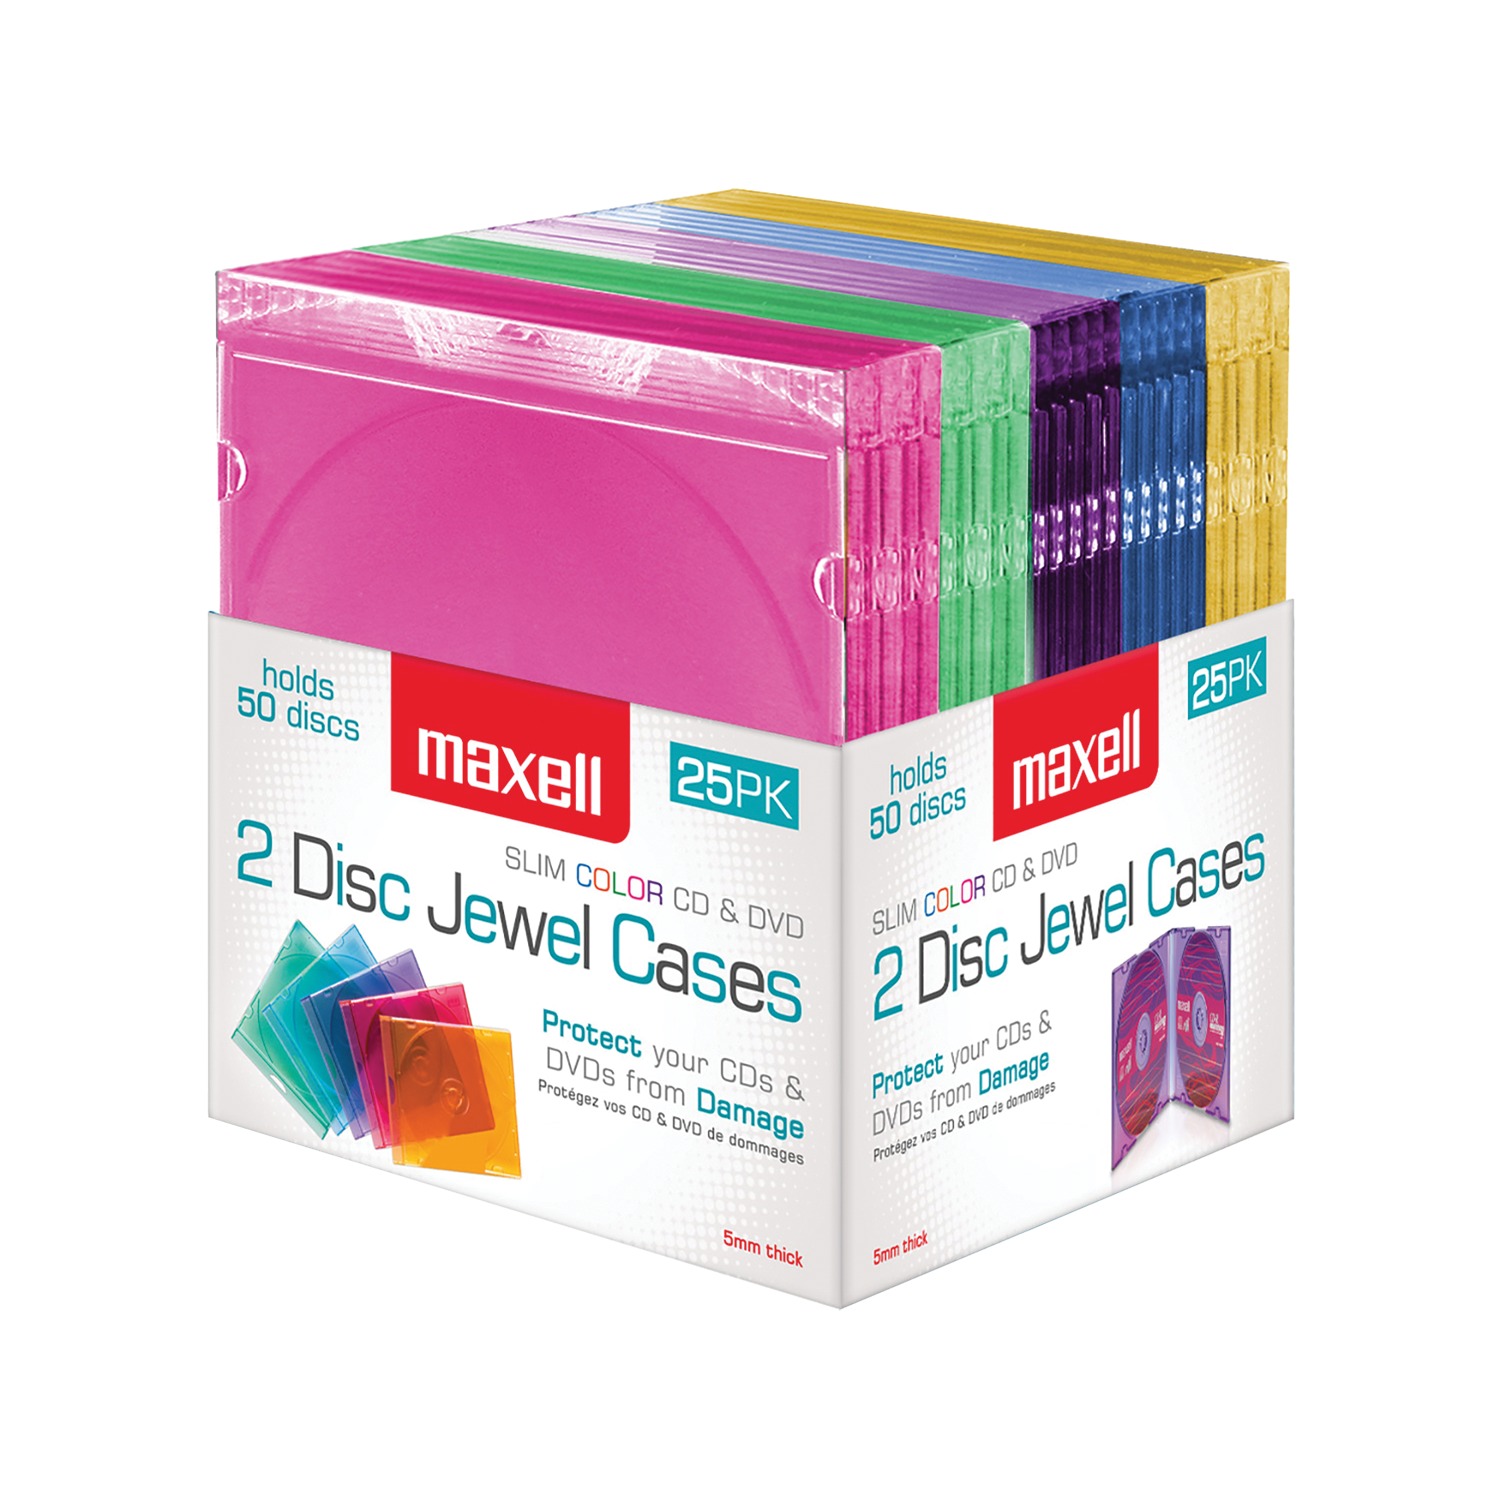 Maxell® Dual-disc Jewel Cases, 25 Pack - image 4 of 4